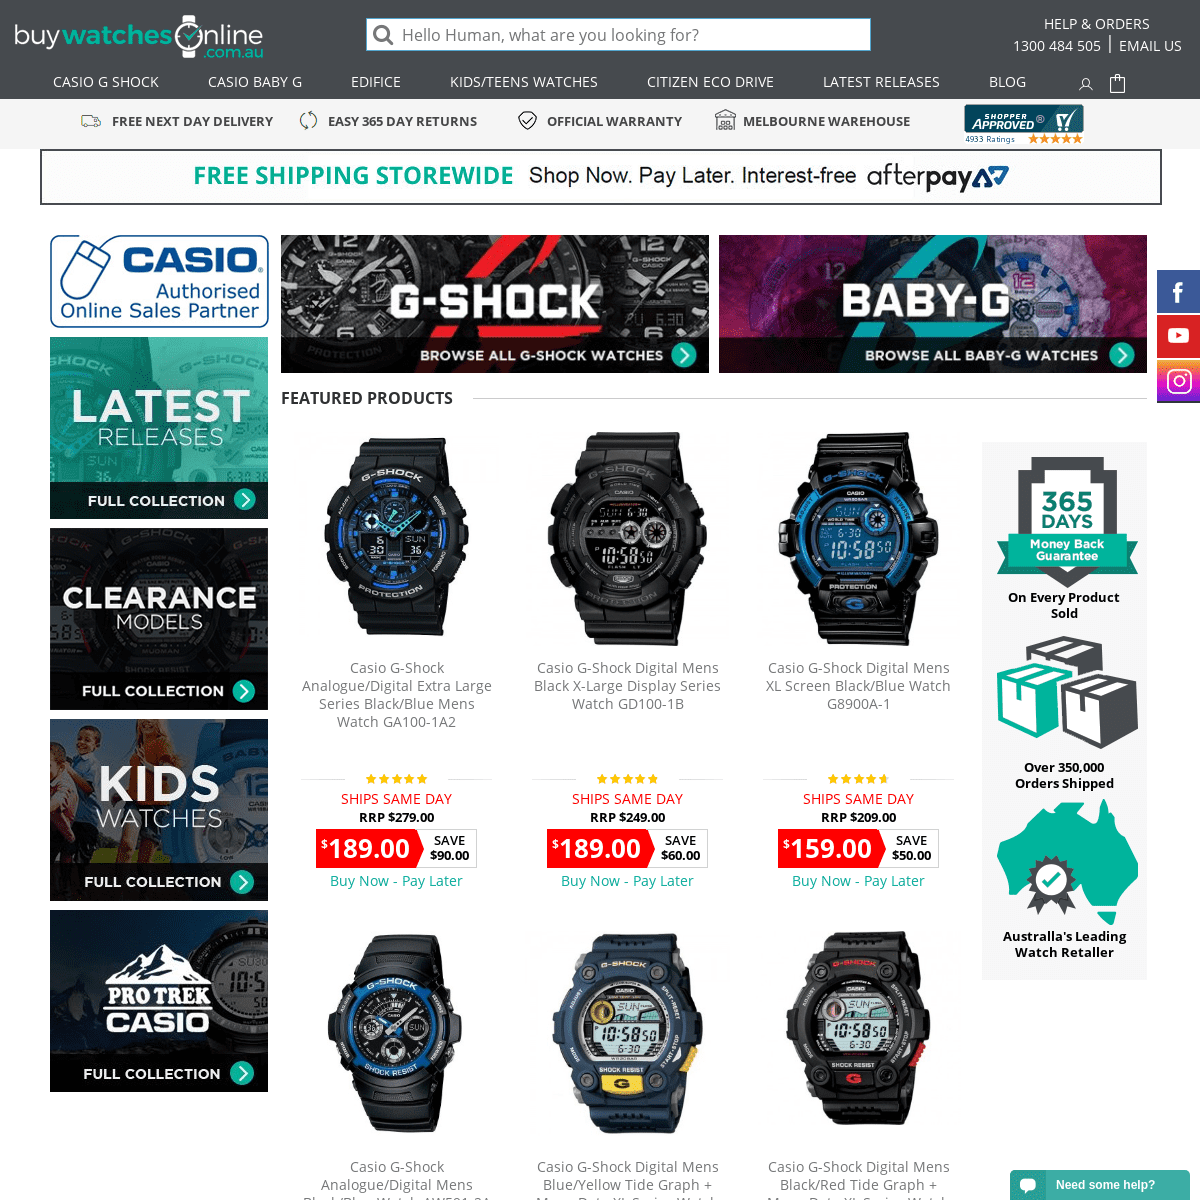 A complete backup of buywatchesonline.com.au